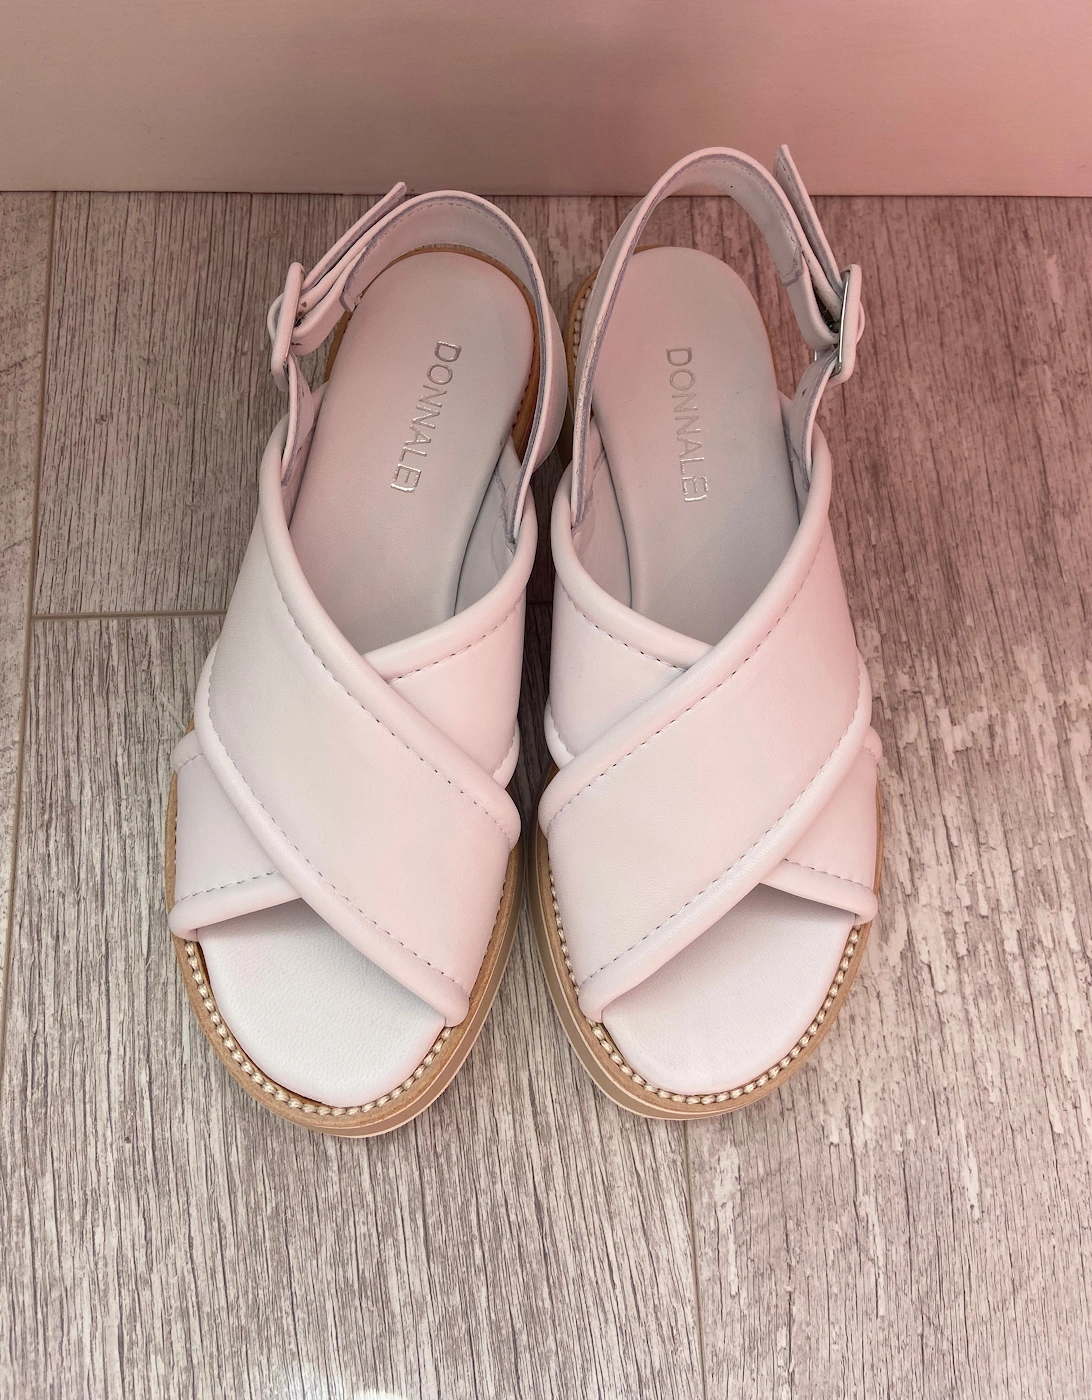 Cross over leather sandals in white